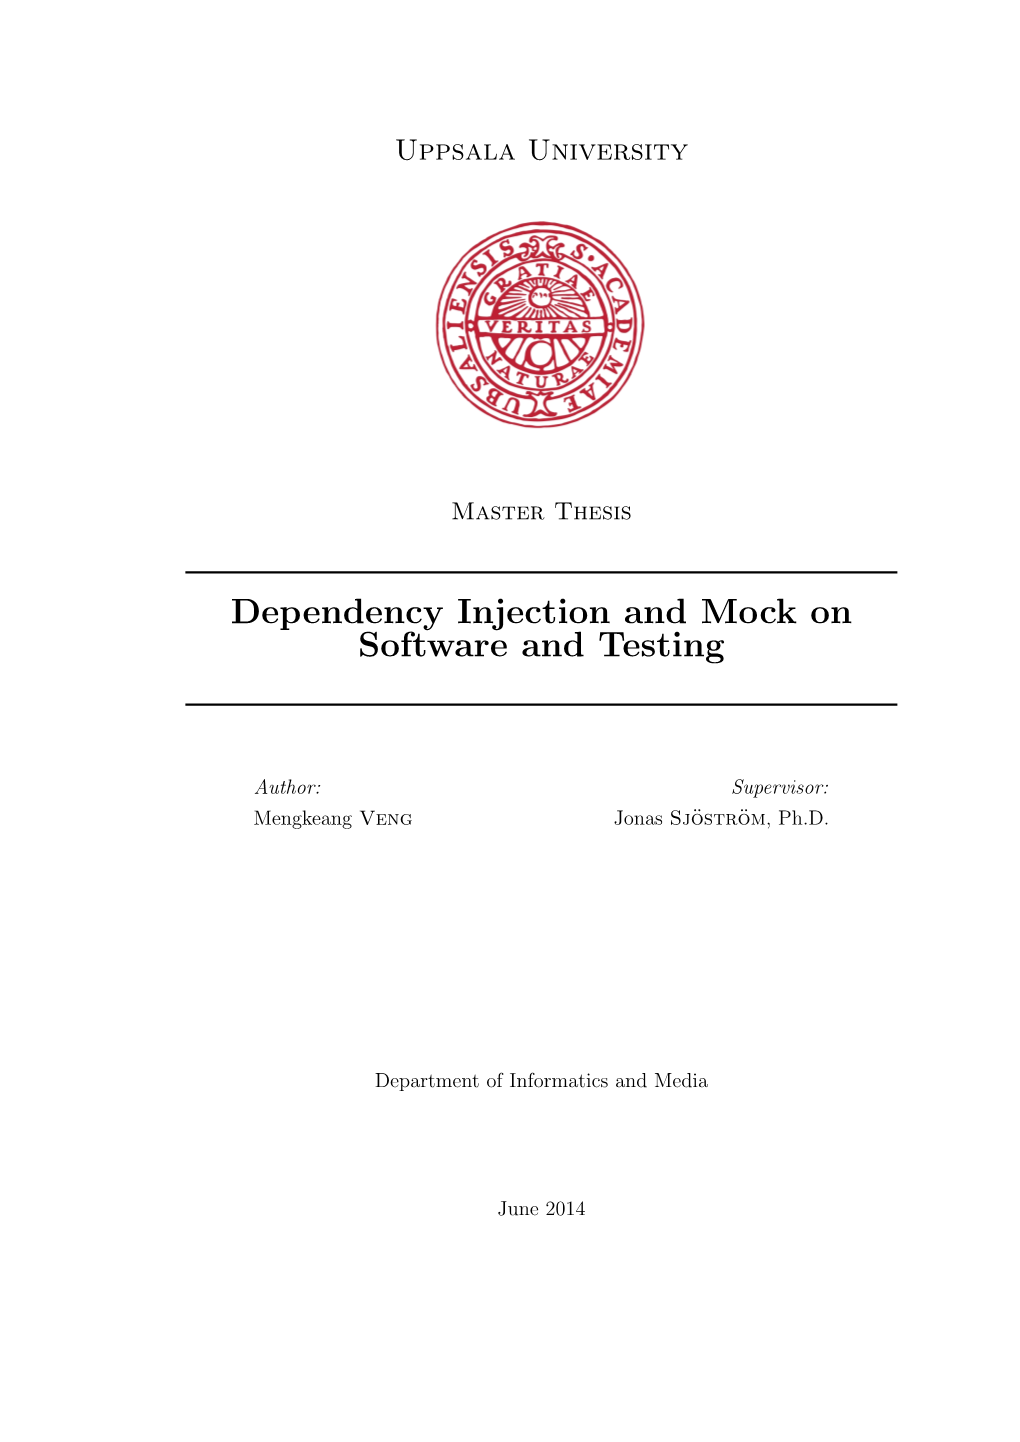 Dependency Injection and Mock on Software and Testing